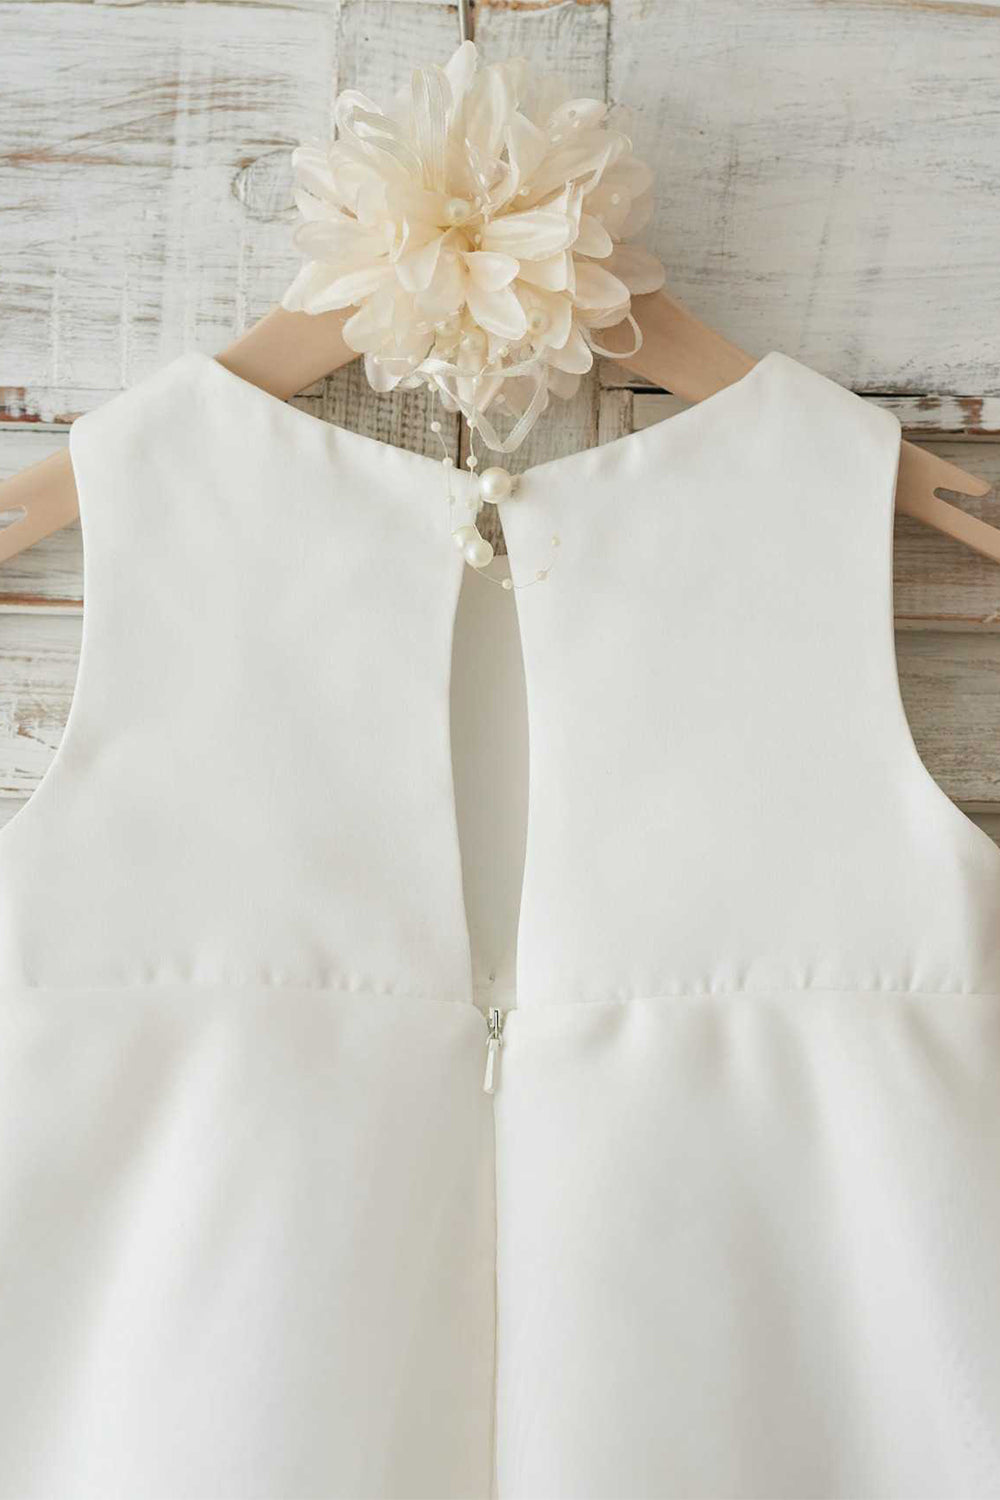 Jewel White Flower Girl Dress with Bowknot